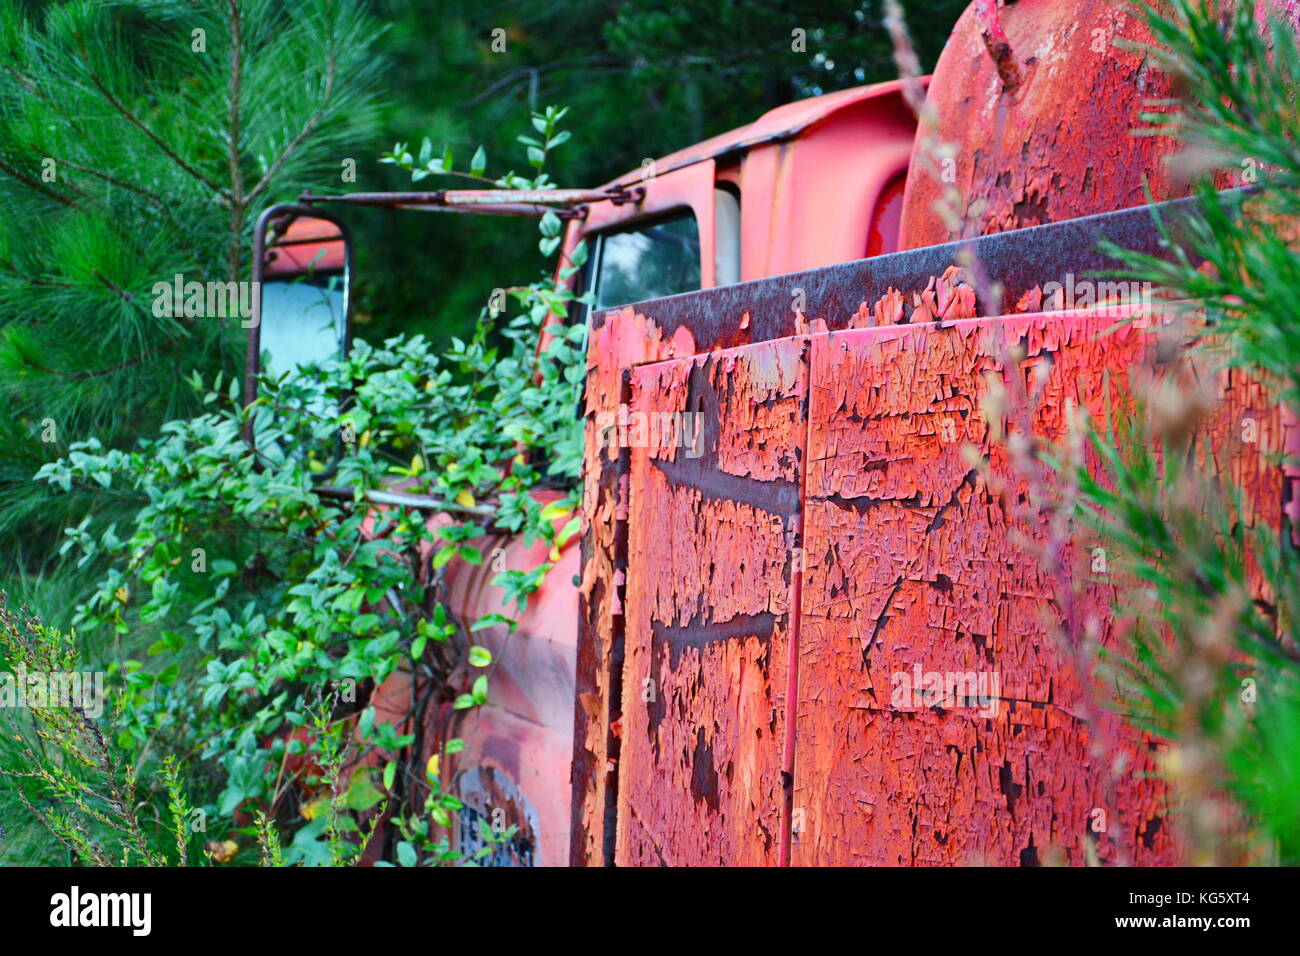 An abandoned Chevy Texaco tanker, scarred by rust and weathering. Stock Photo